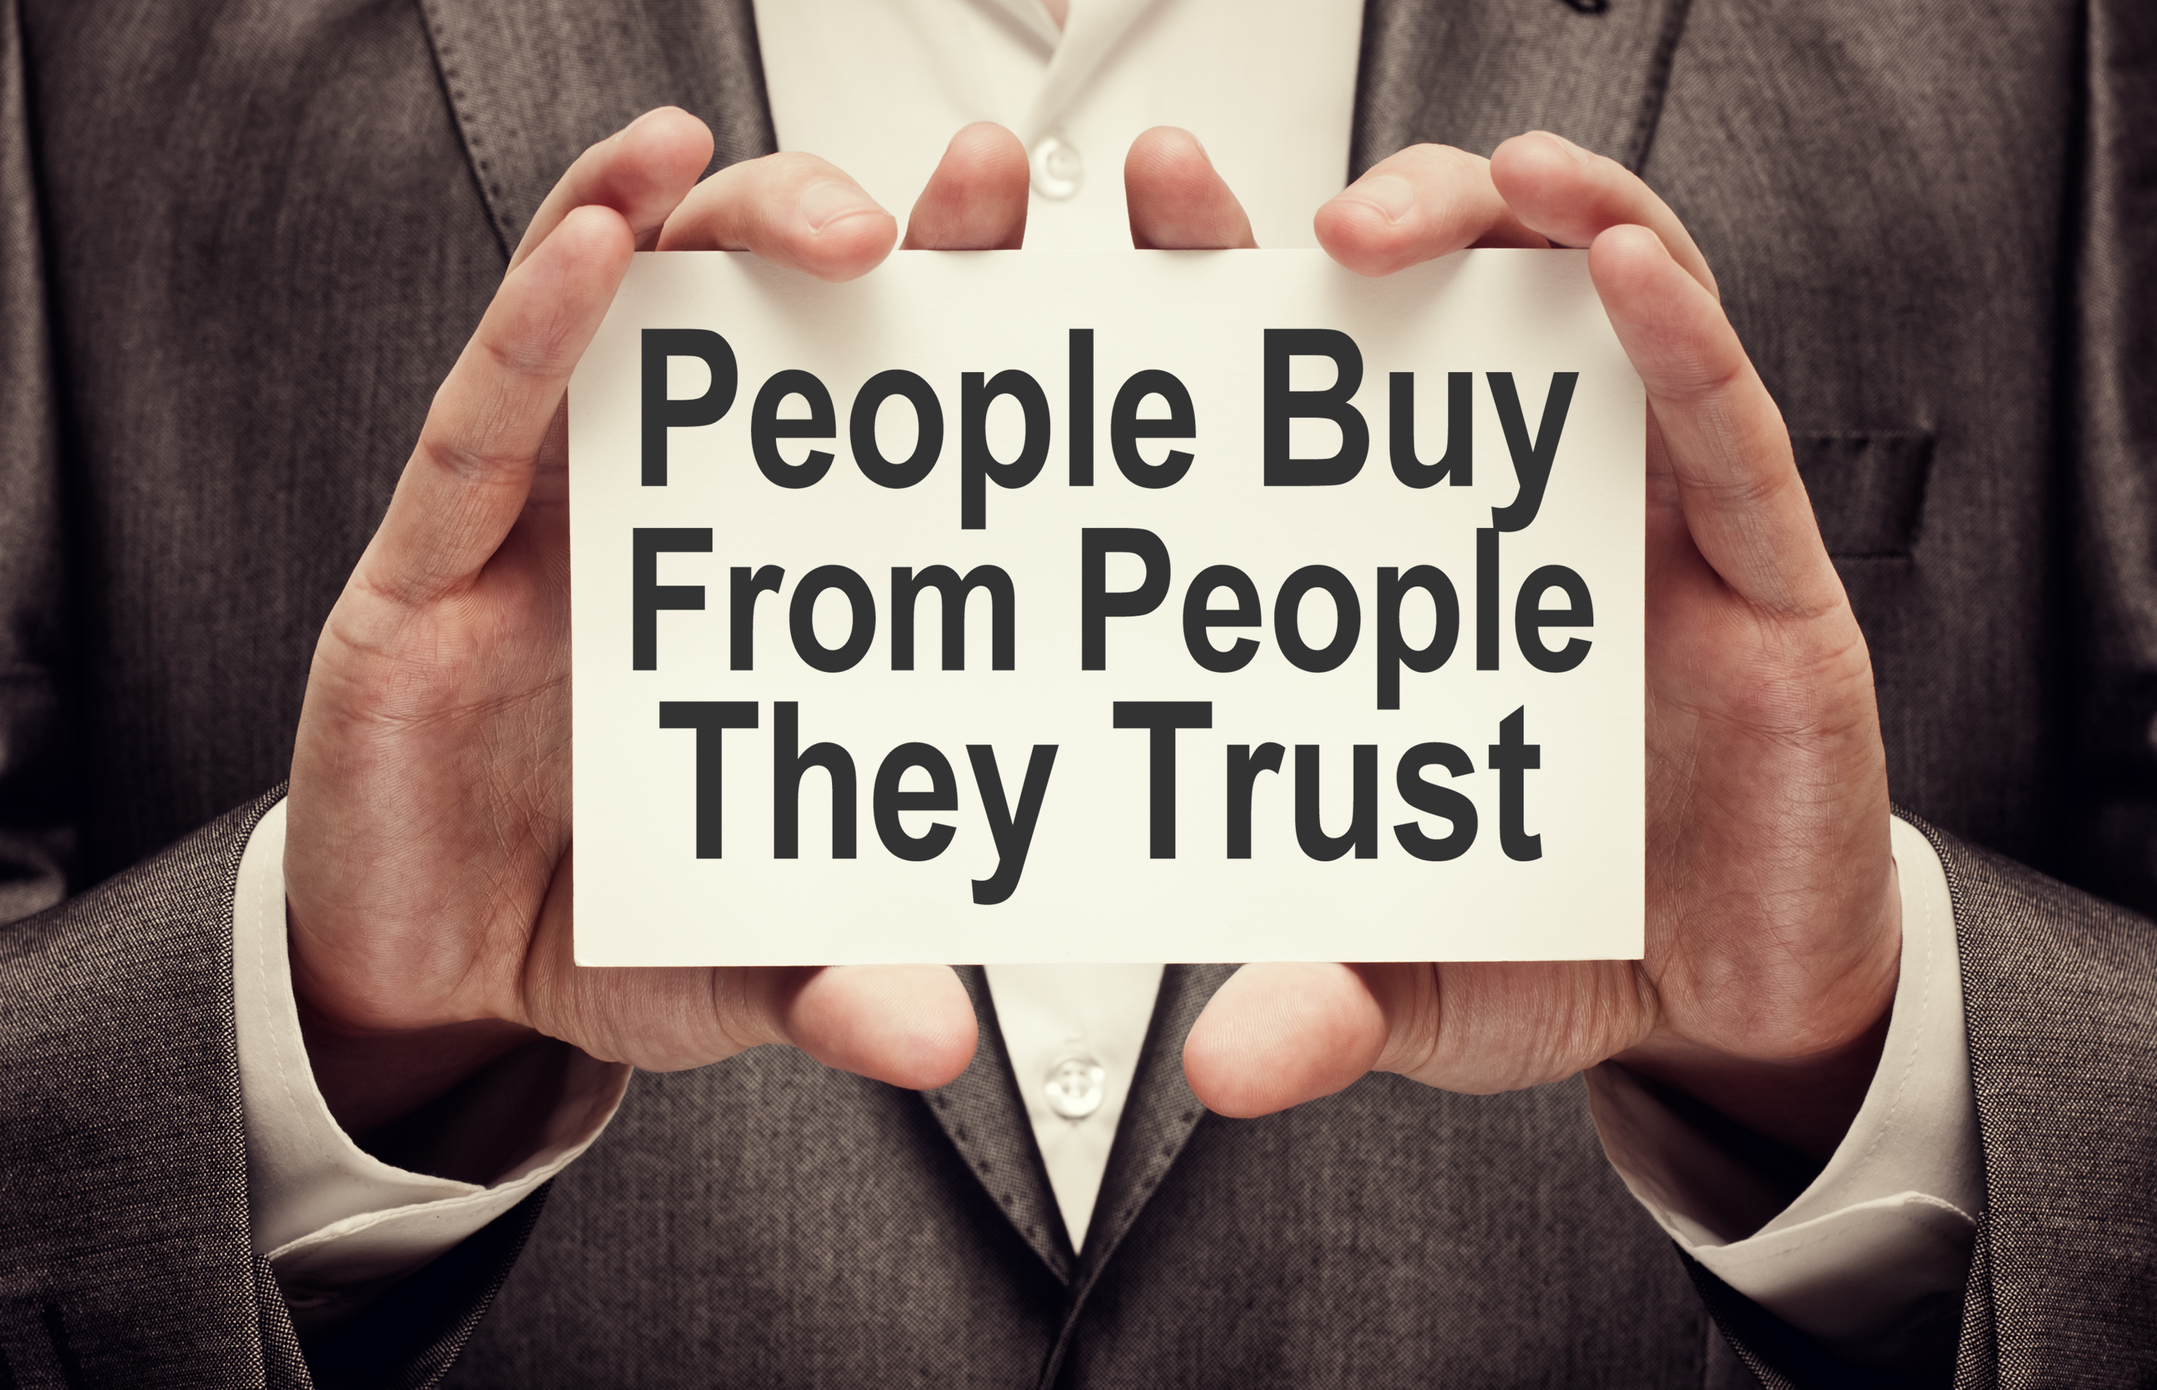 People Buy From People They Trust. Businessman holding a card with a message text written on it